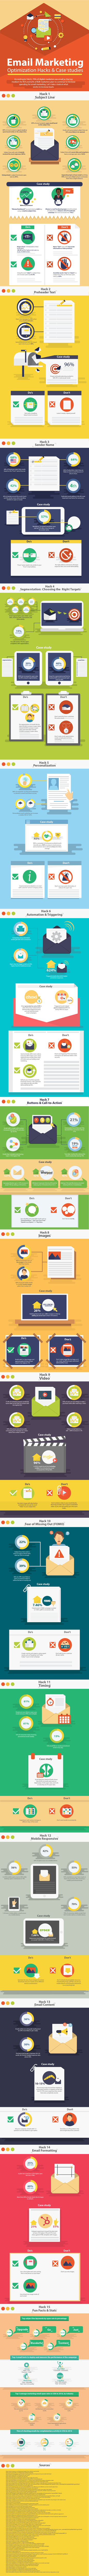 email subject line - infographic